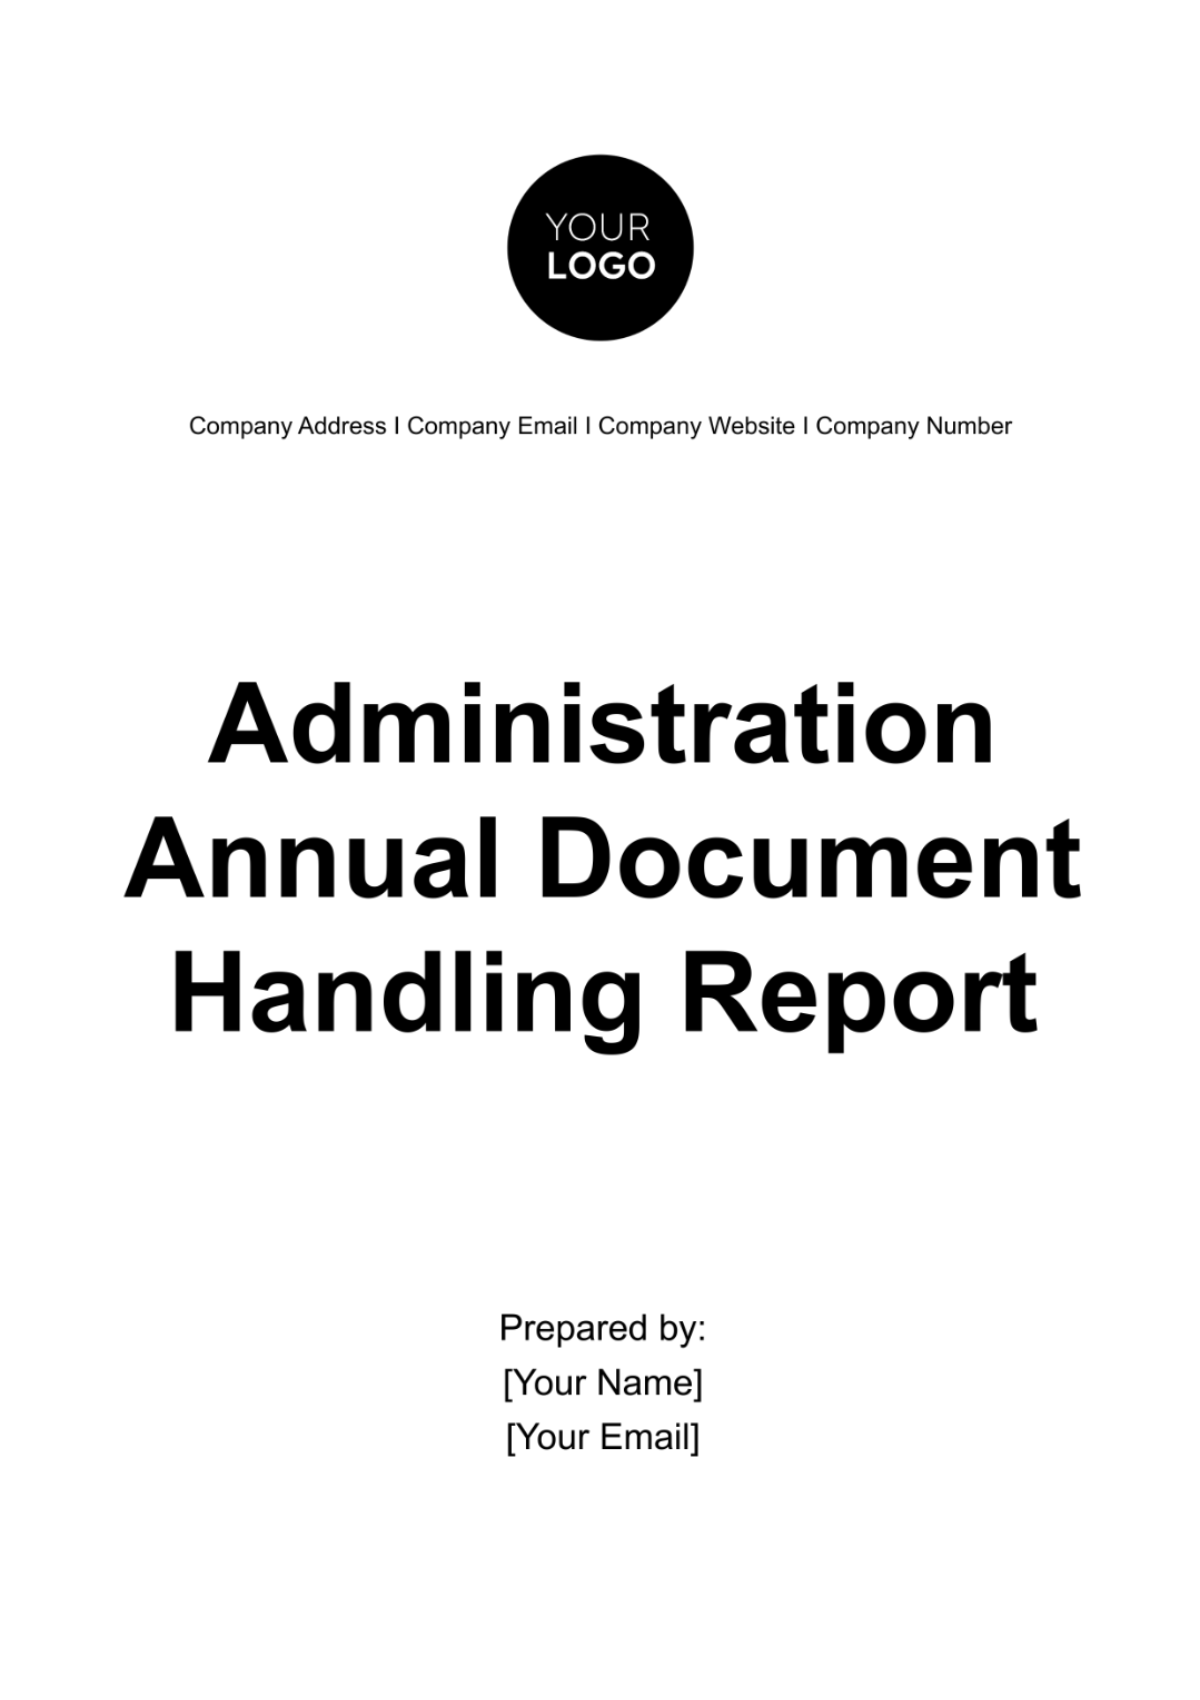 Administration Annual Document Handling Report Template